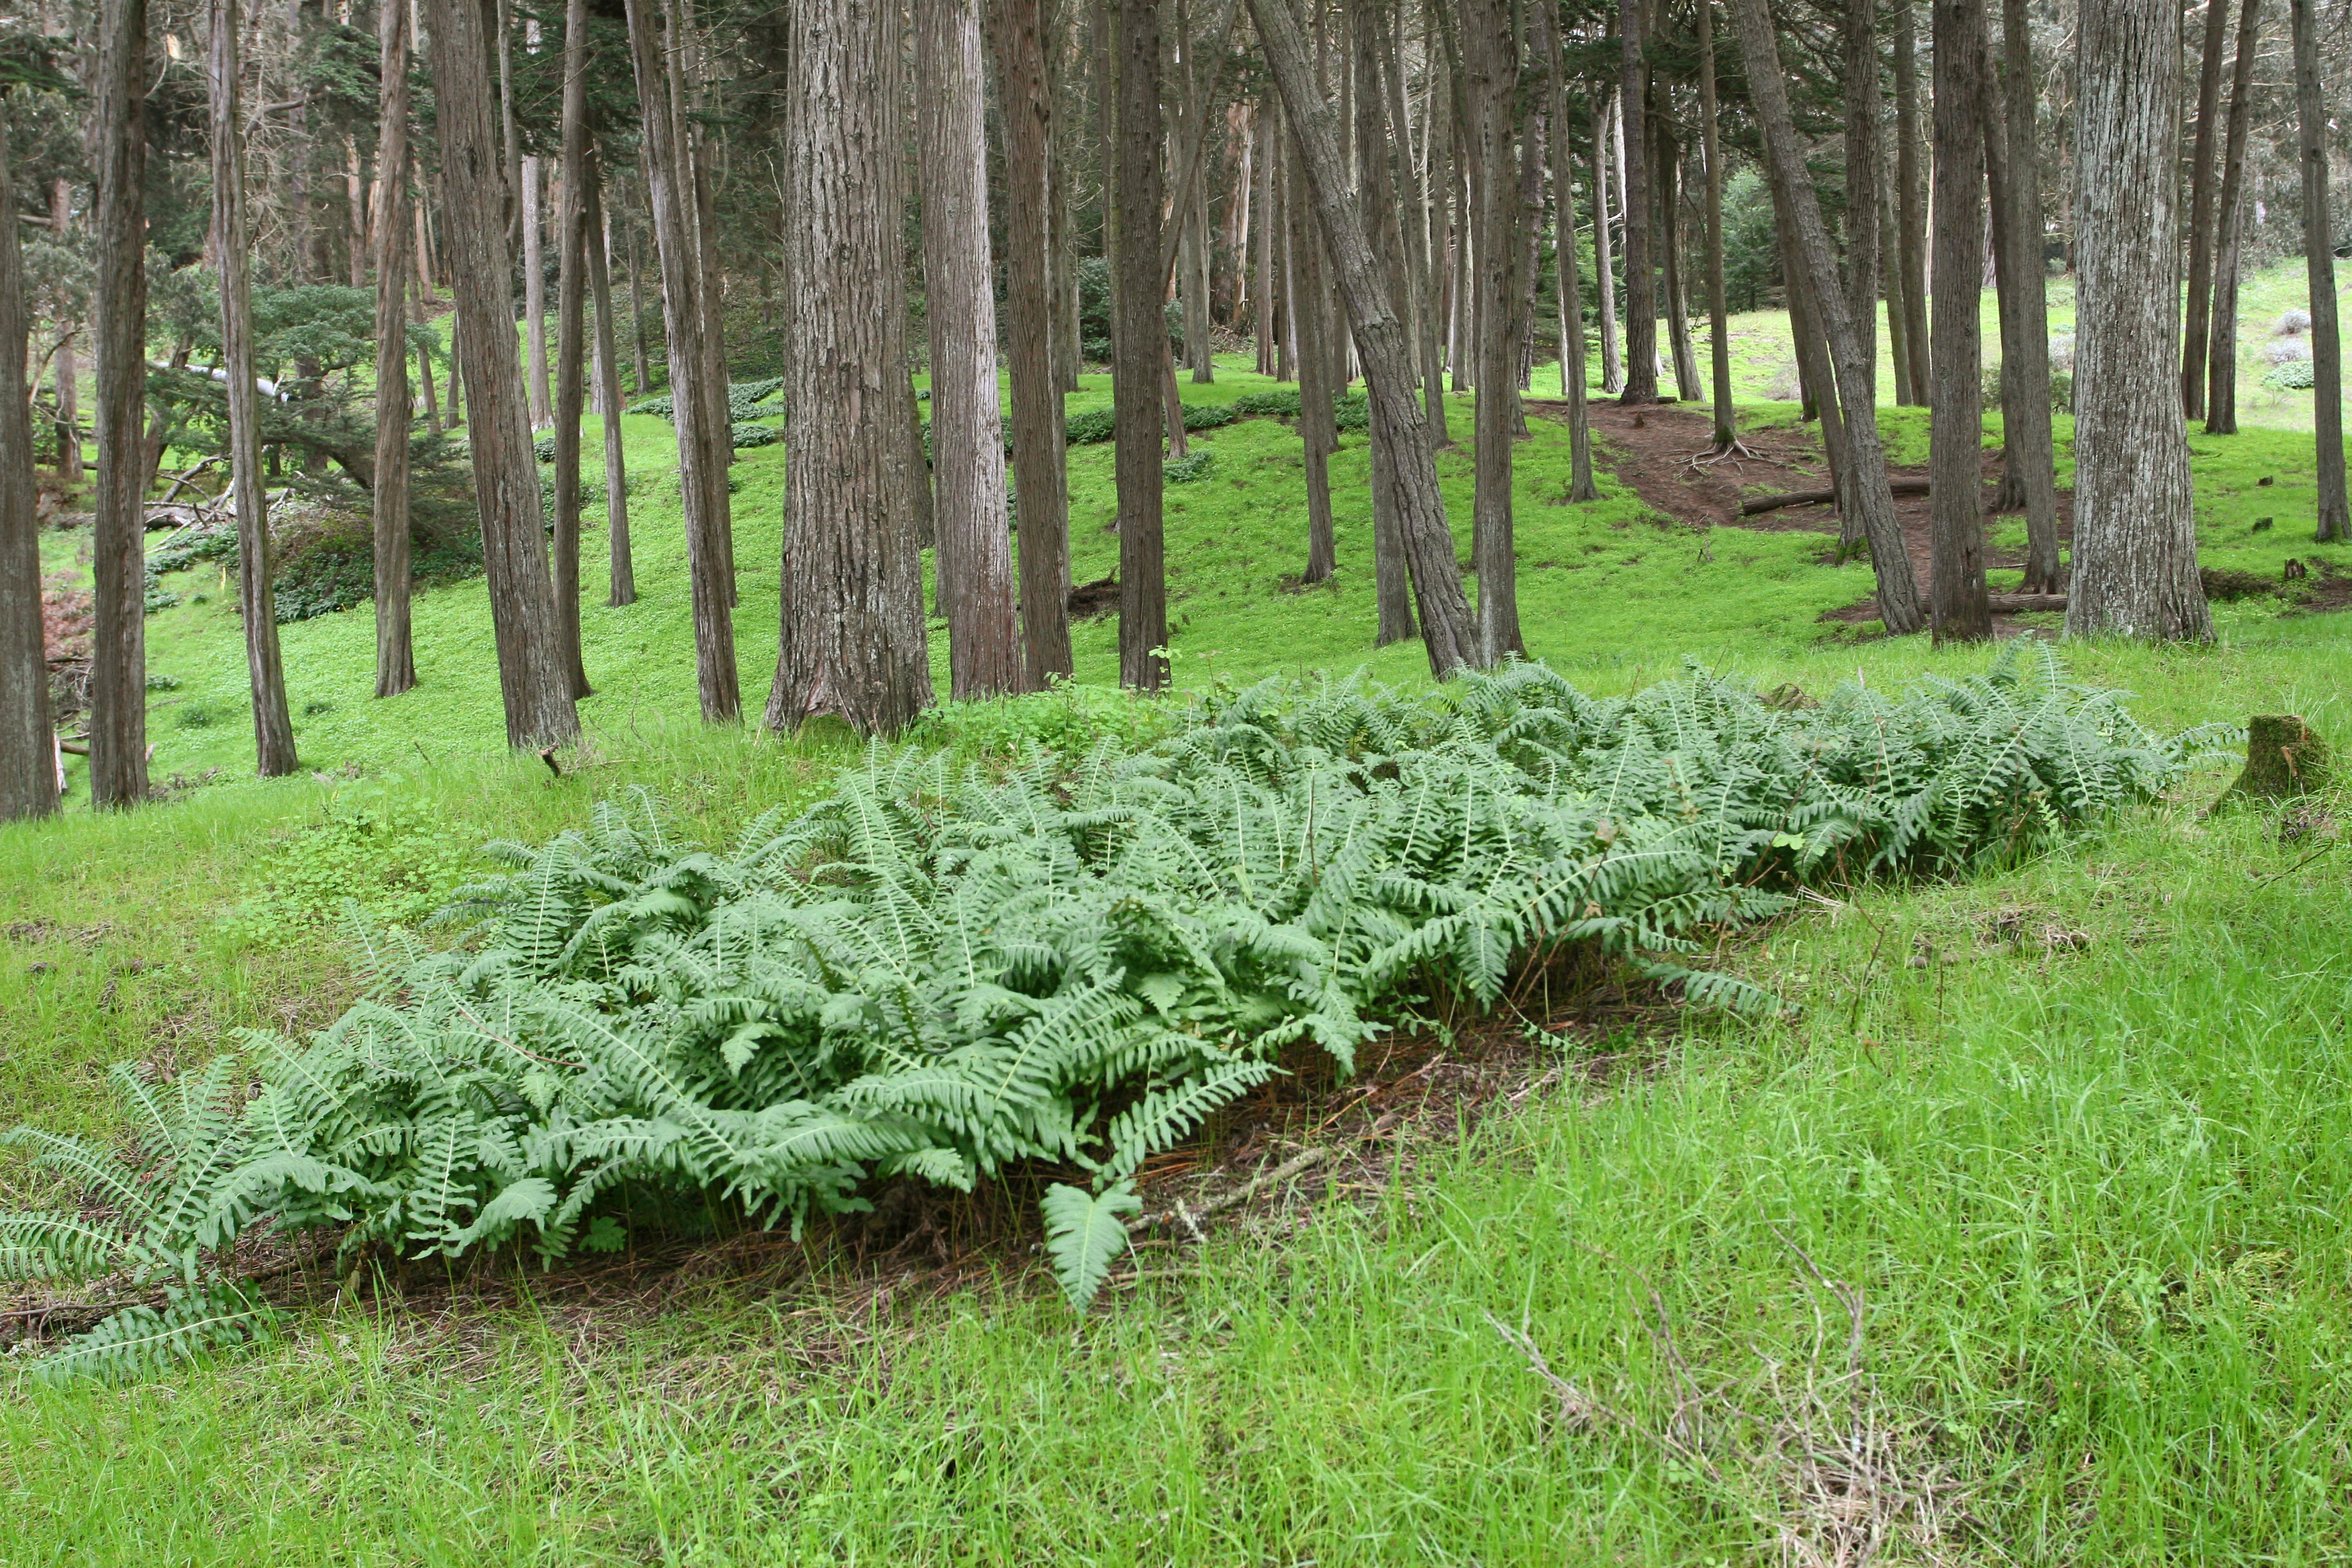 Scattered Monterey Cypress trunks with green grass and fern cover at their bases.